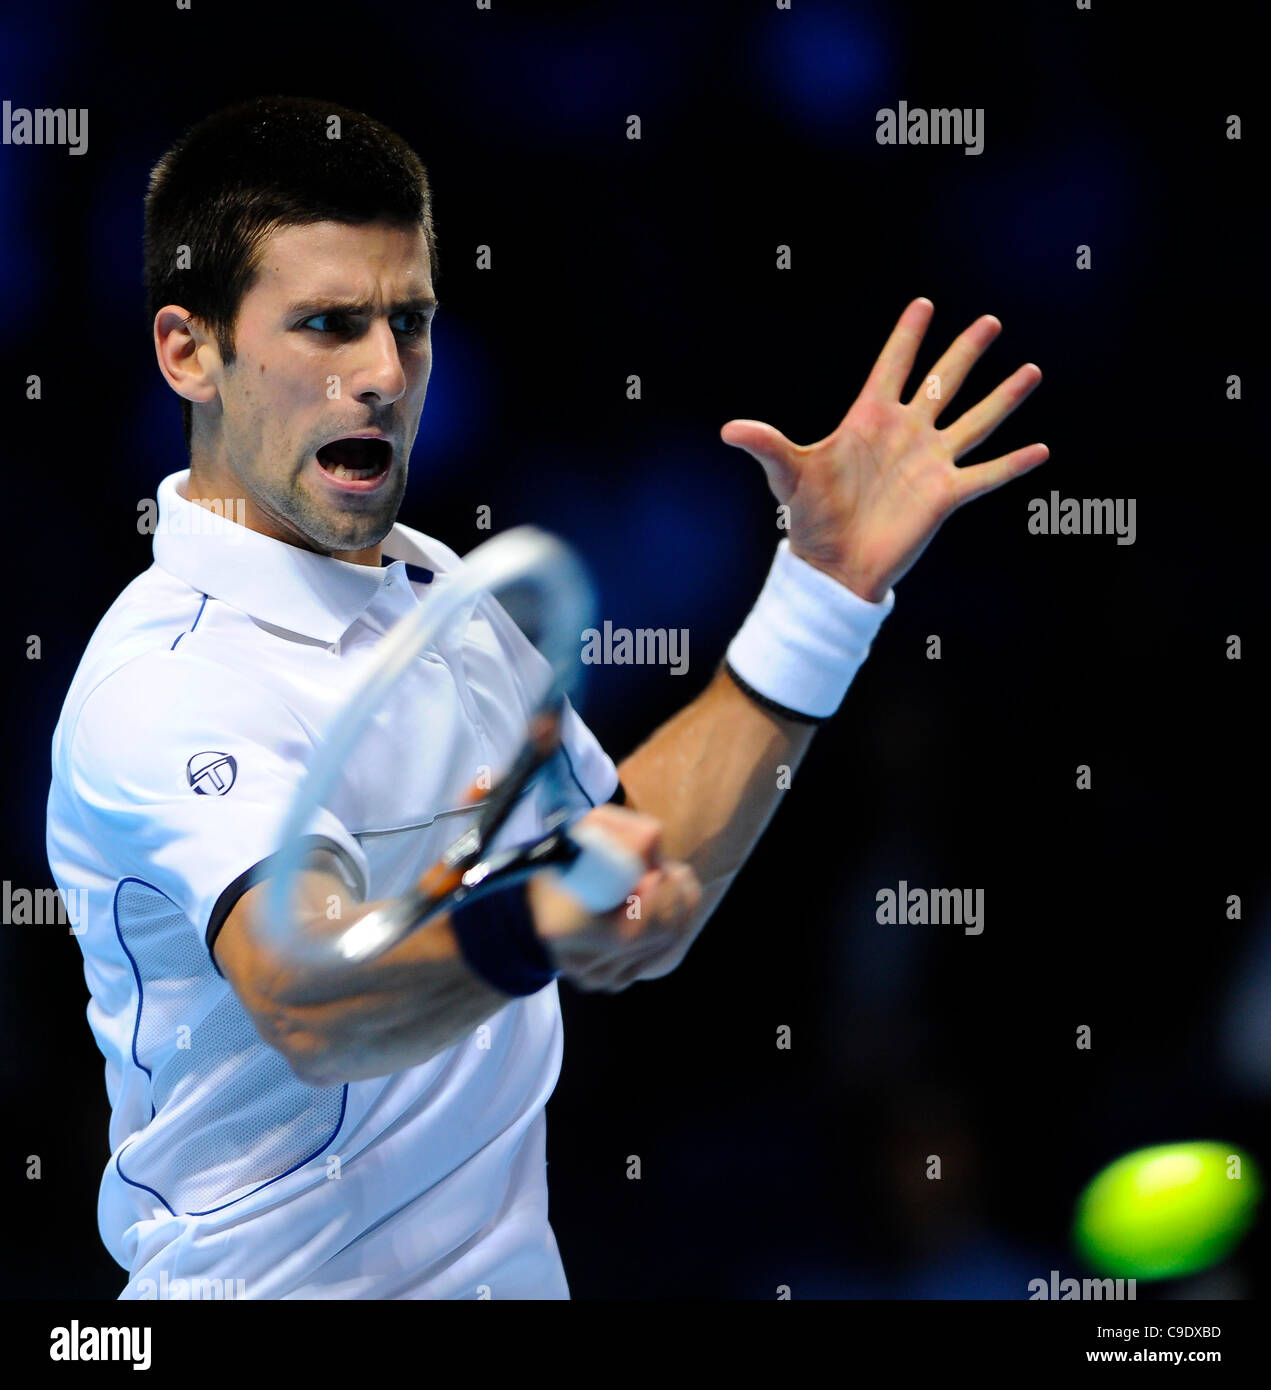 25.11.2011 London, England. [1] Novak Djokovic (SRB) in action against [9] Janko Tipsarevic (SRB) during a round robin match in the Barclays ATP World Tour Finals at The O2 Arena. Tipsarevic went on to beat favourite Djokovic 2 sets to 1. Stock Photo